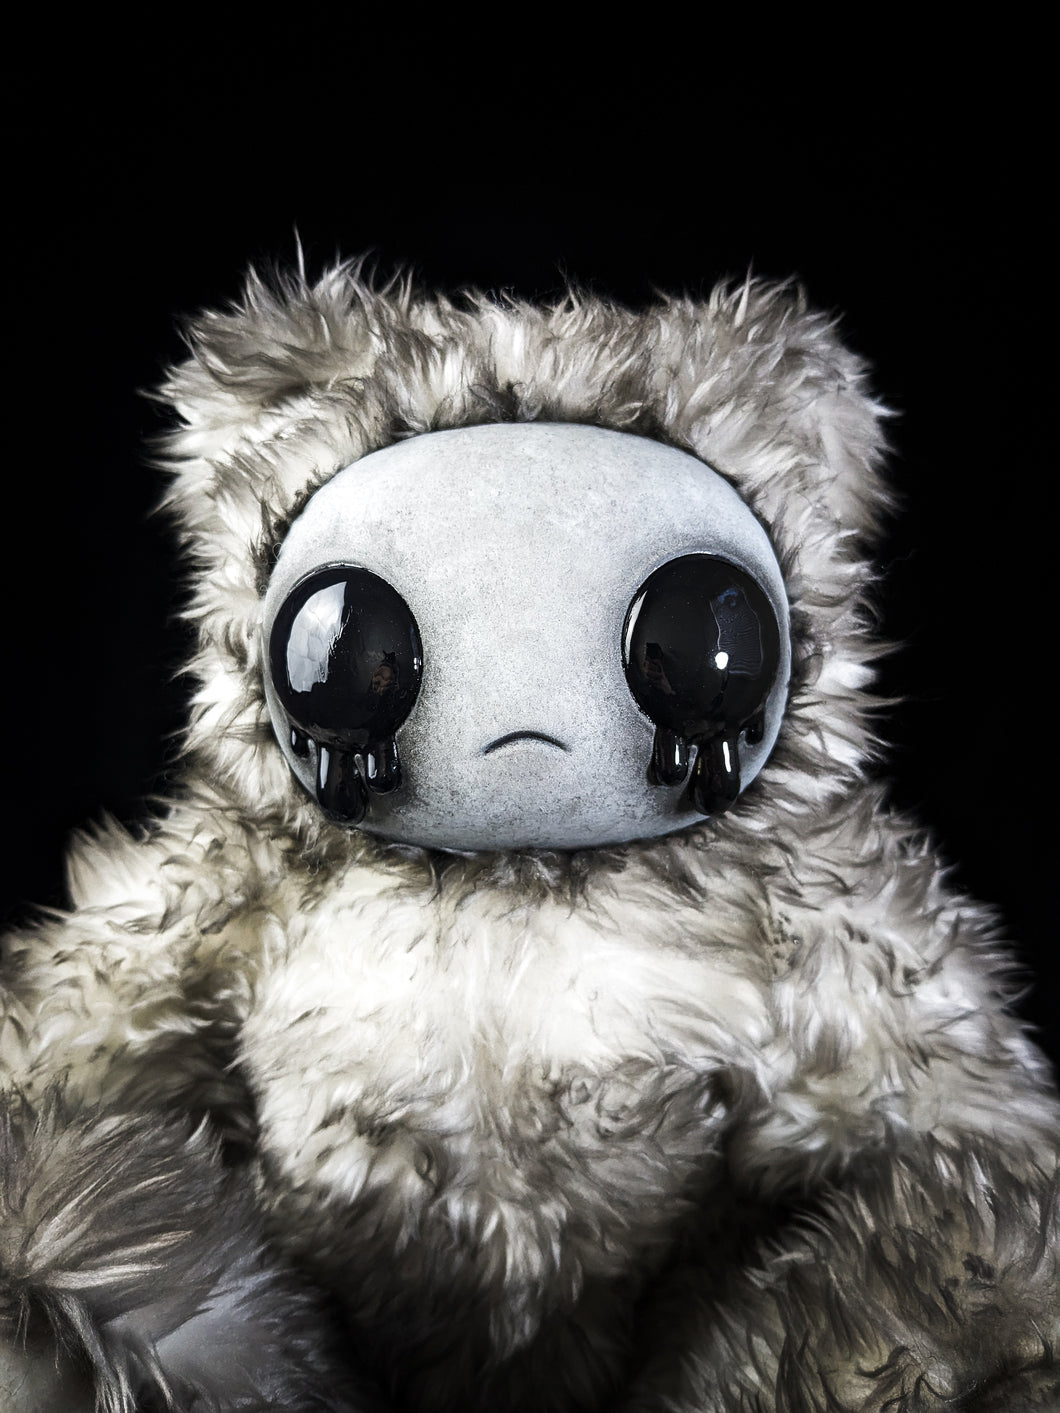 Ink-Stained Sorrow: AZAZEL- CRYPTCRITS Handcrafted Monochrome Crying Demon Art Doll Plush Toy for Eccentric Souls